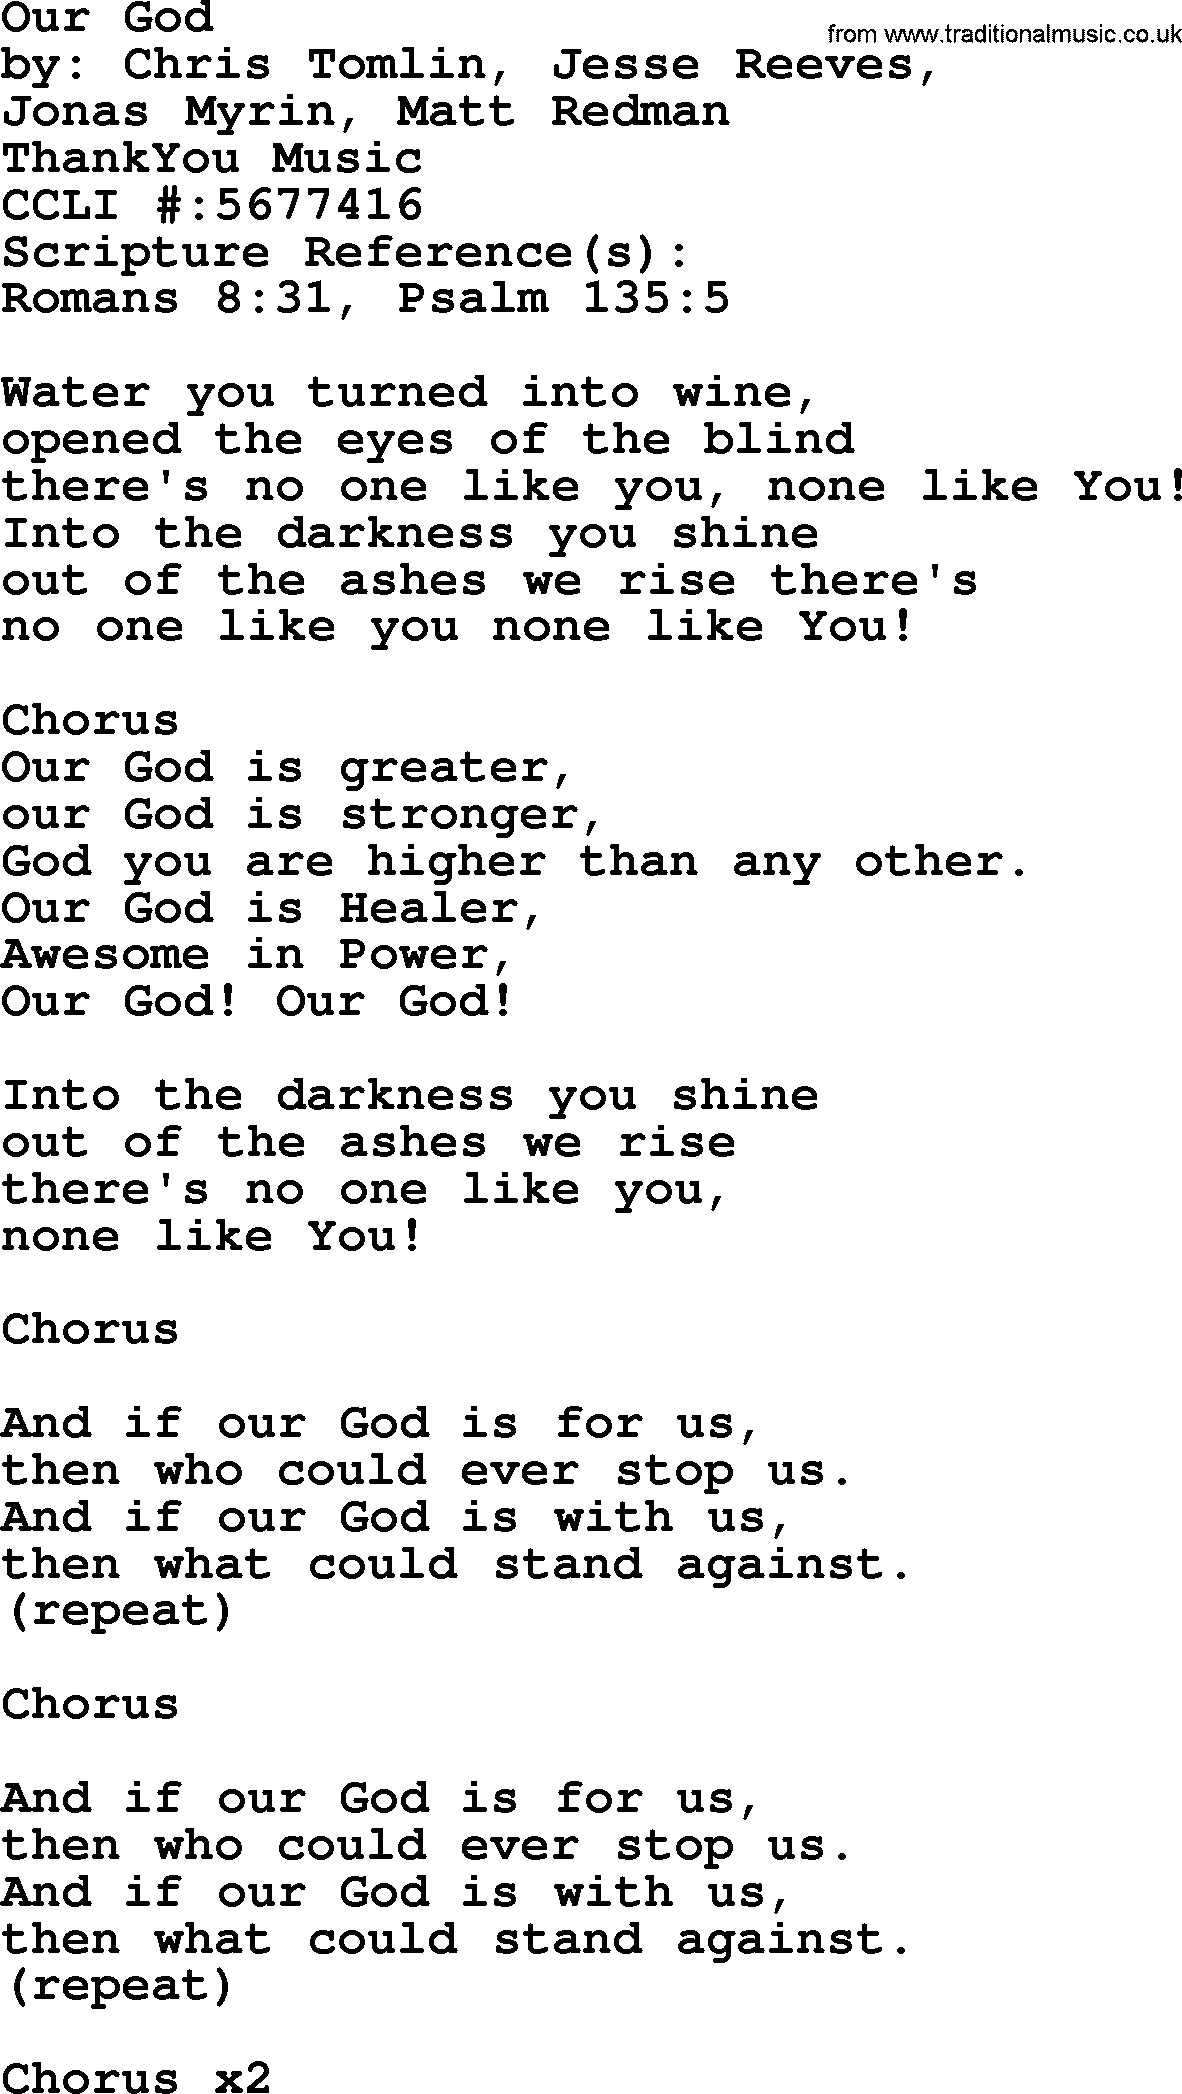 A collection of 500+ most sung Christian church hymns and songs, title: Our God~, lyrics, PPTX and PDF